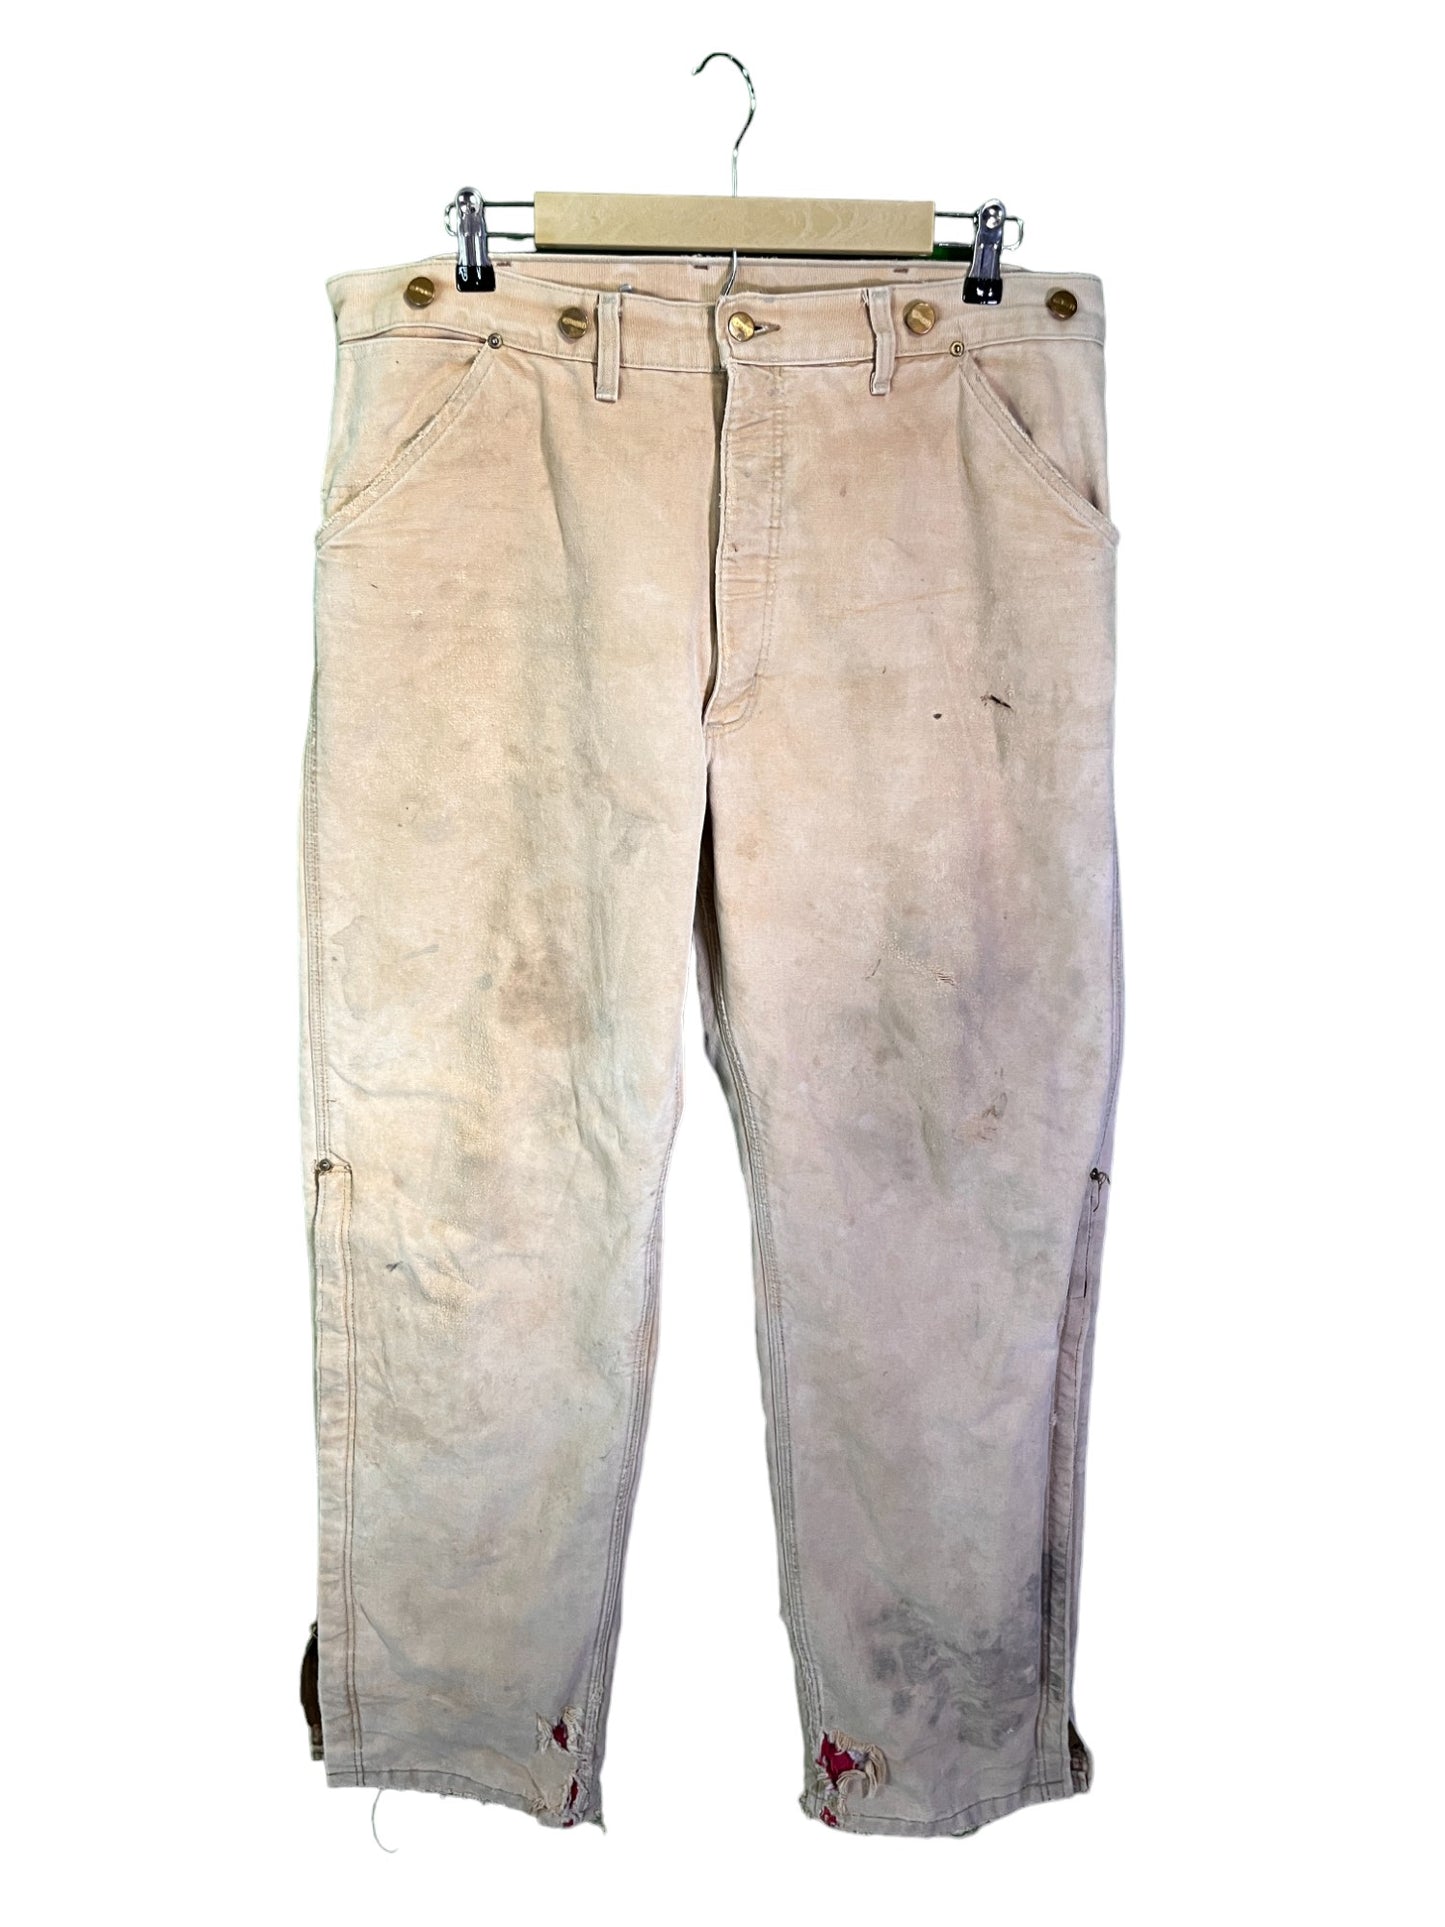 Vintage Carhartt Insulated Distressed Work Pants Size 36x32